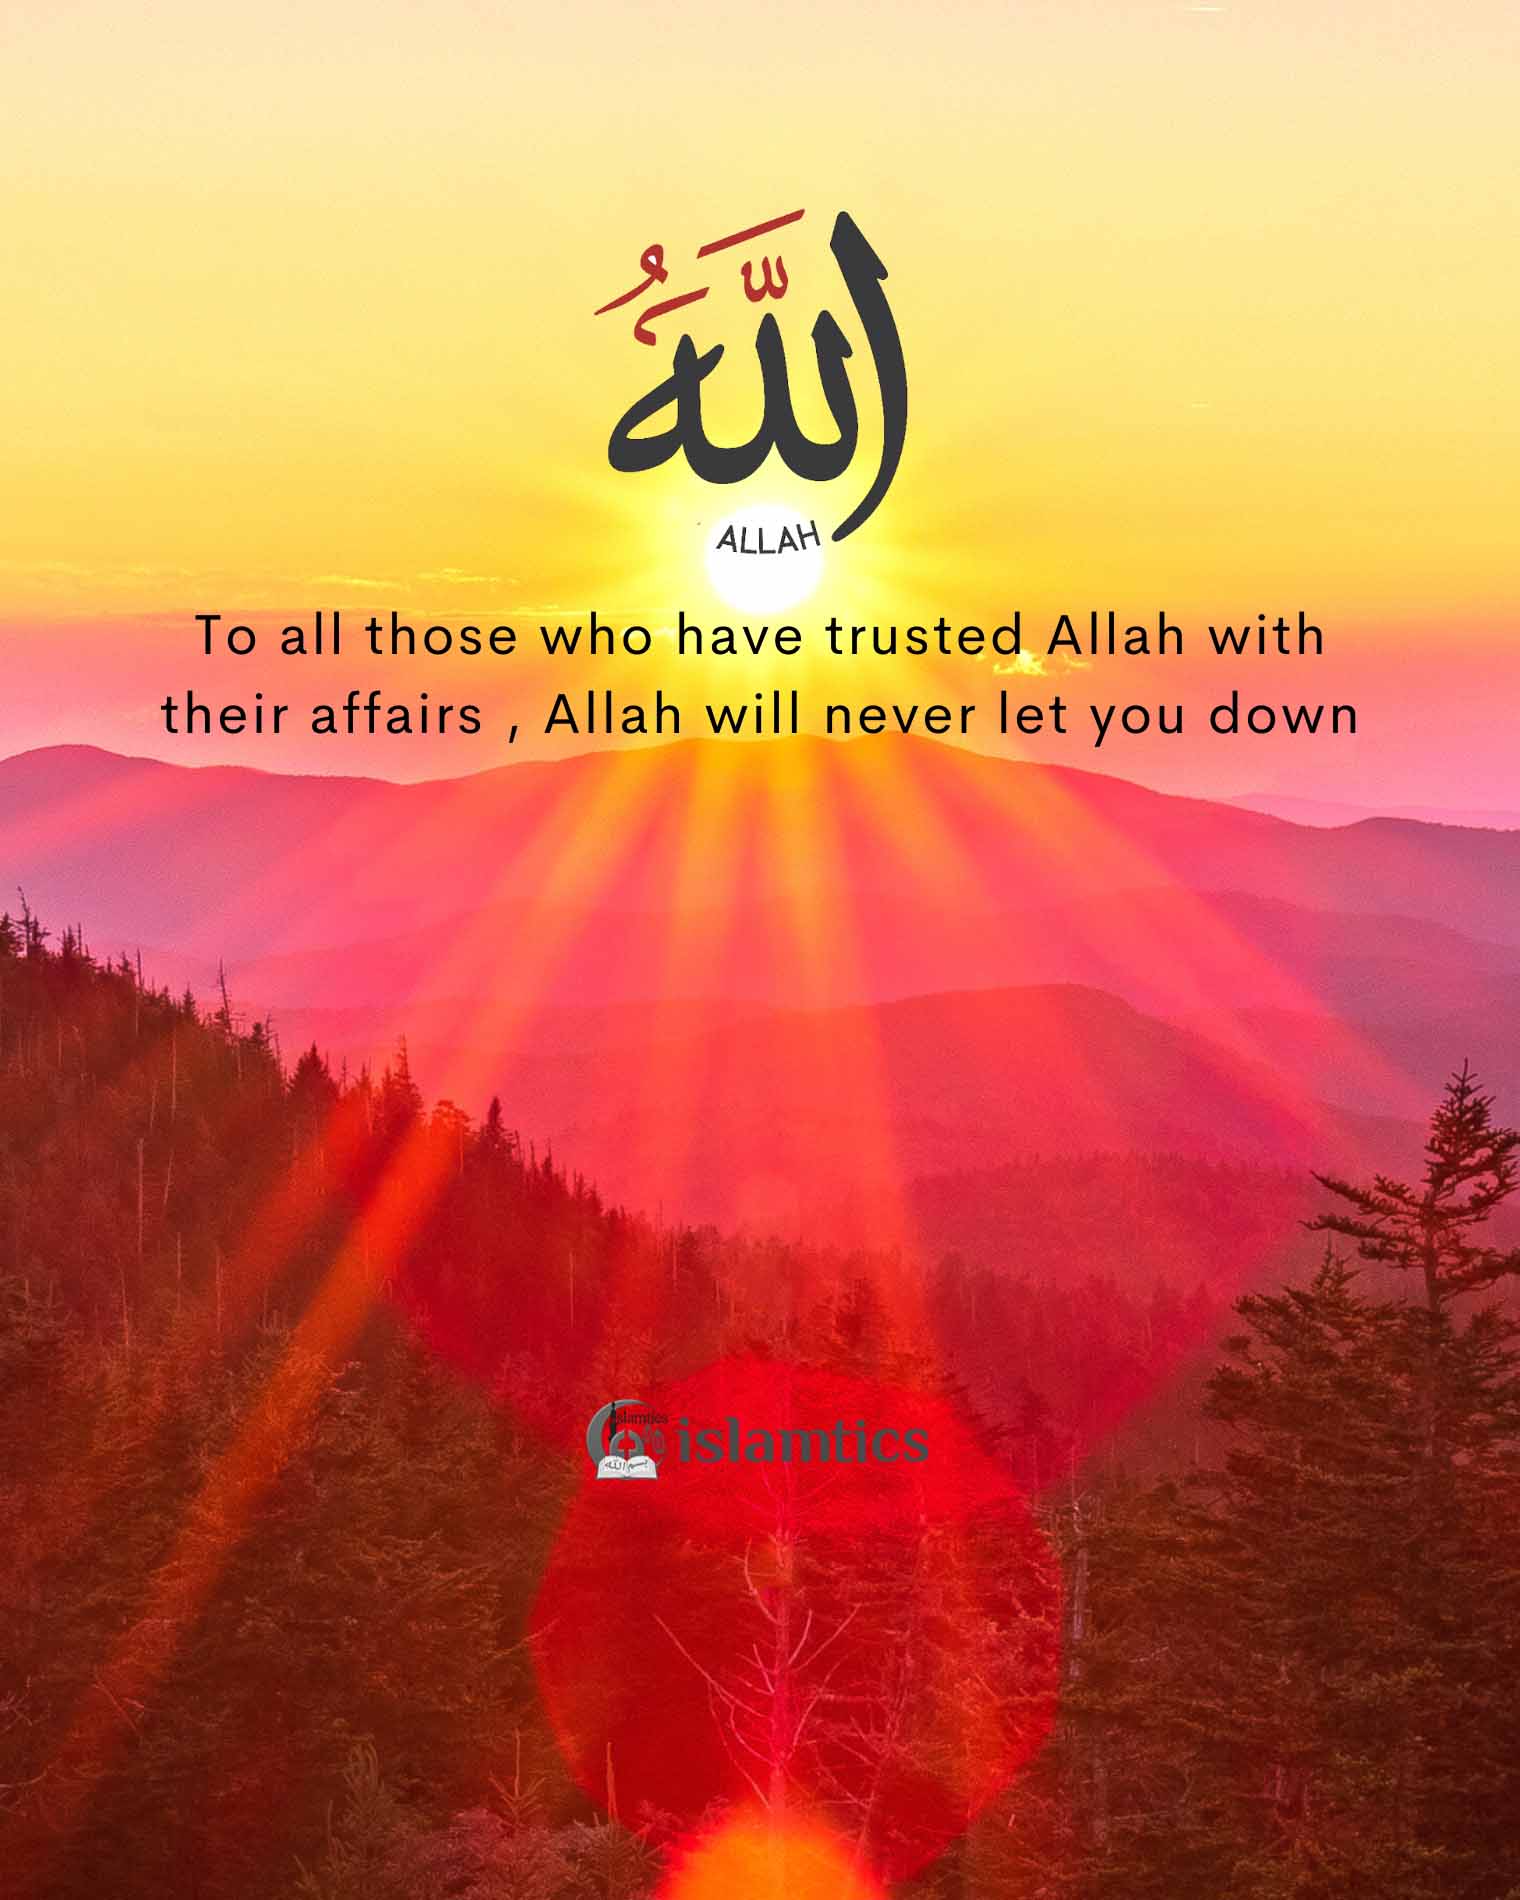  Allah will never let you down